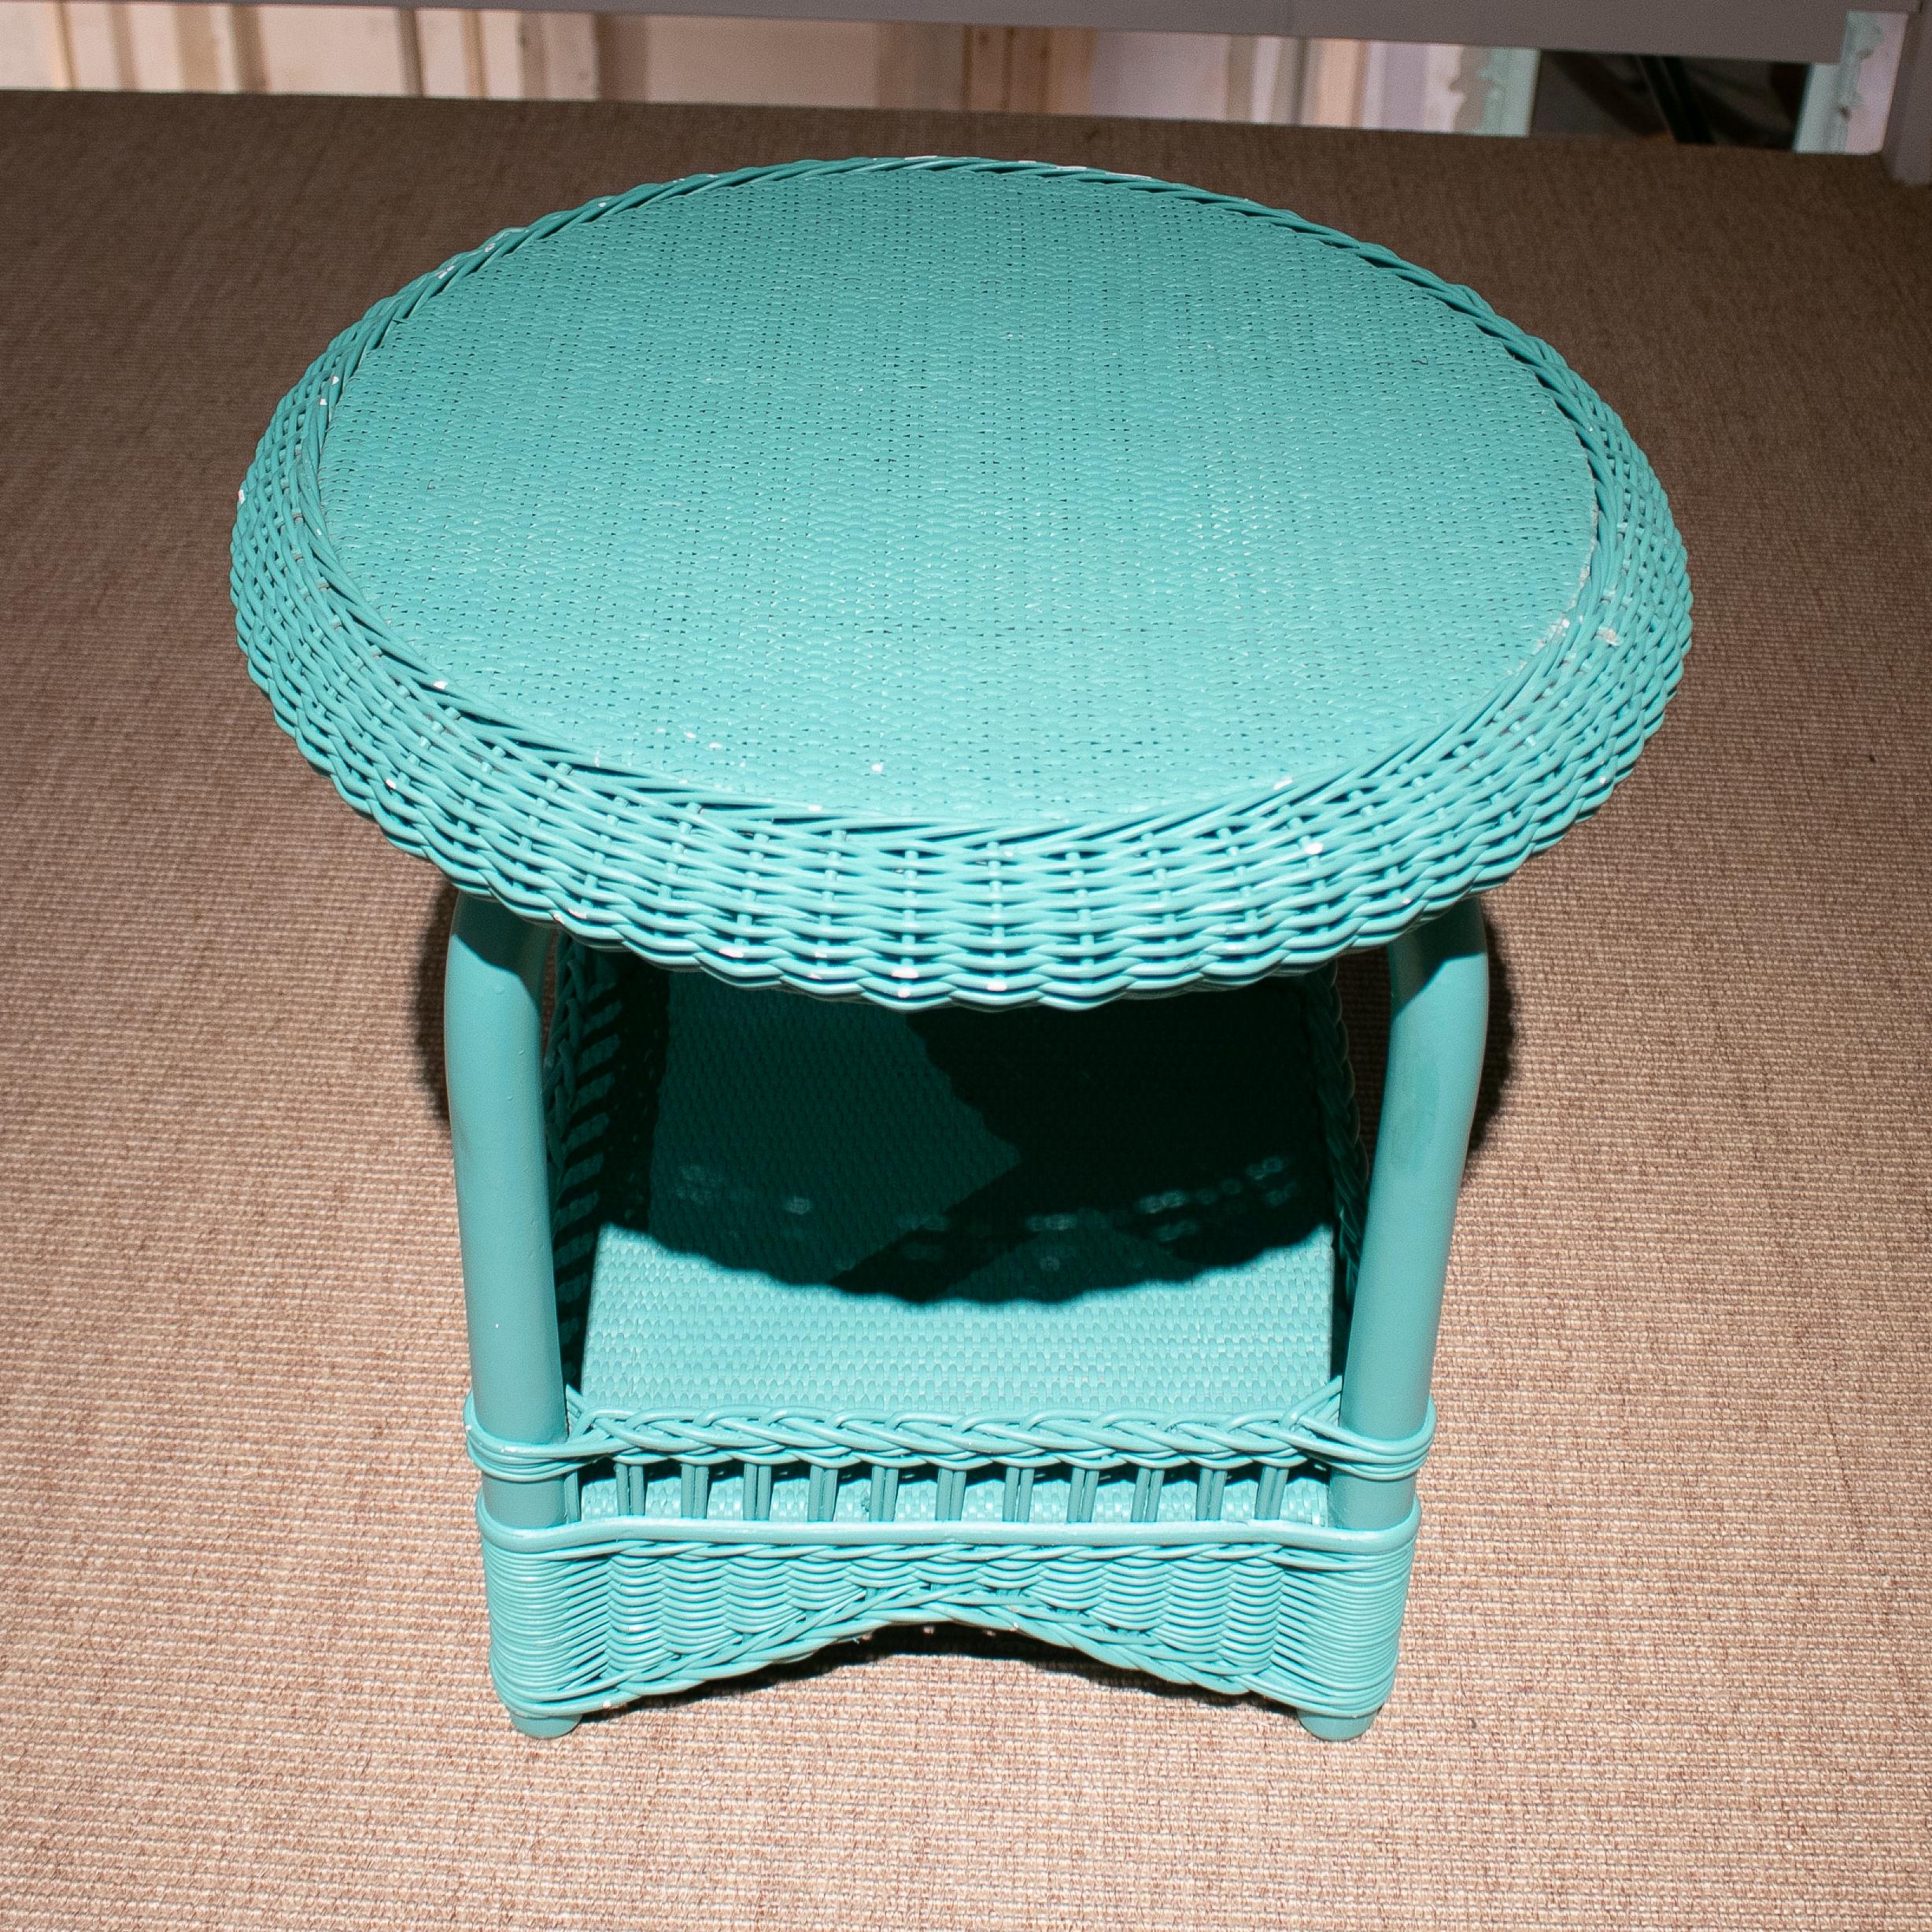 20th Century 1980s Spanish Turquoise Hand Woven Wicker Round Side Table